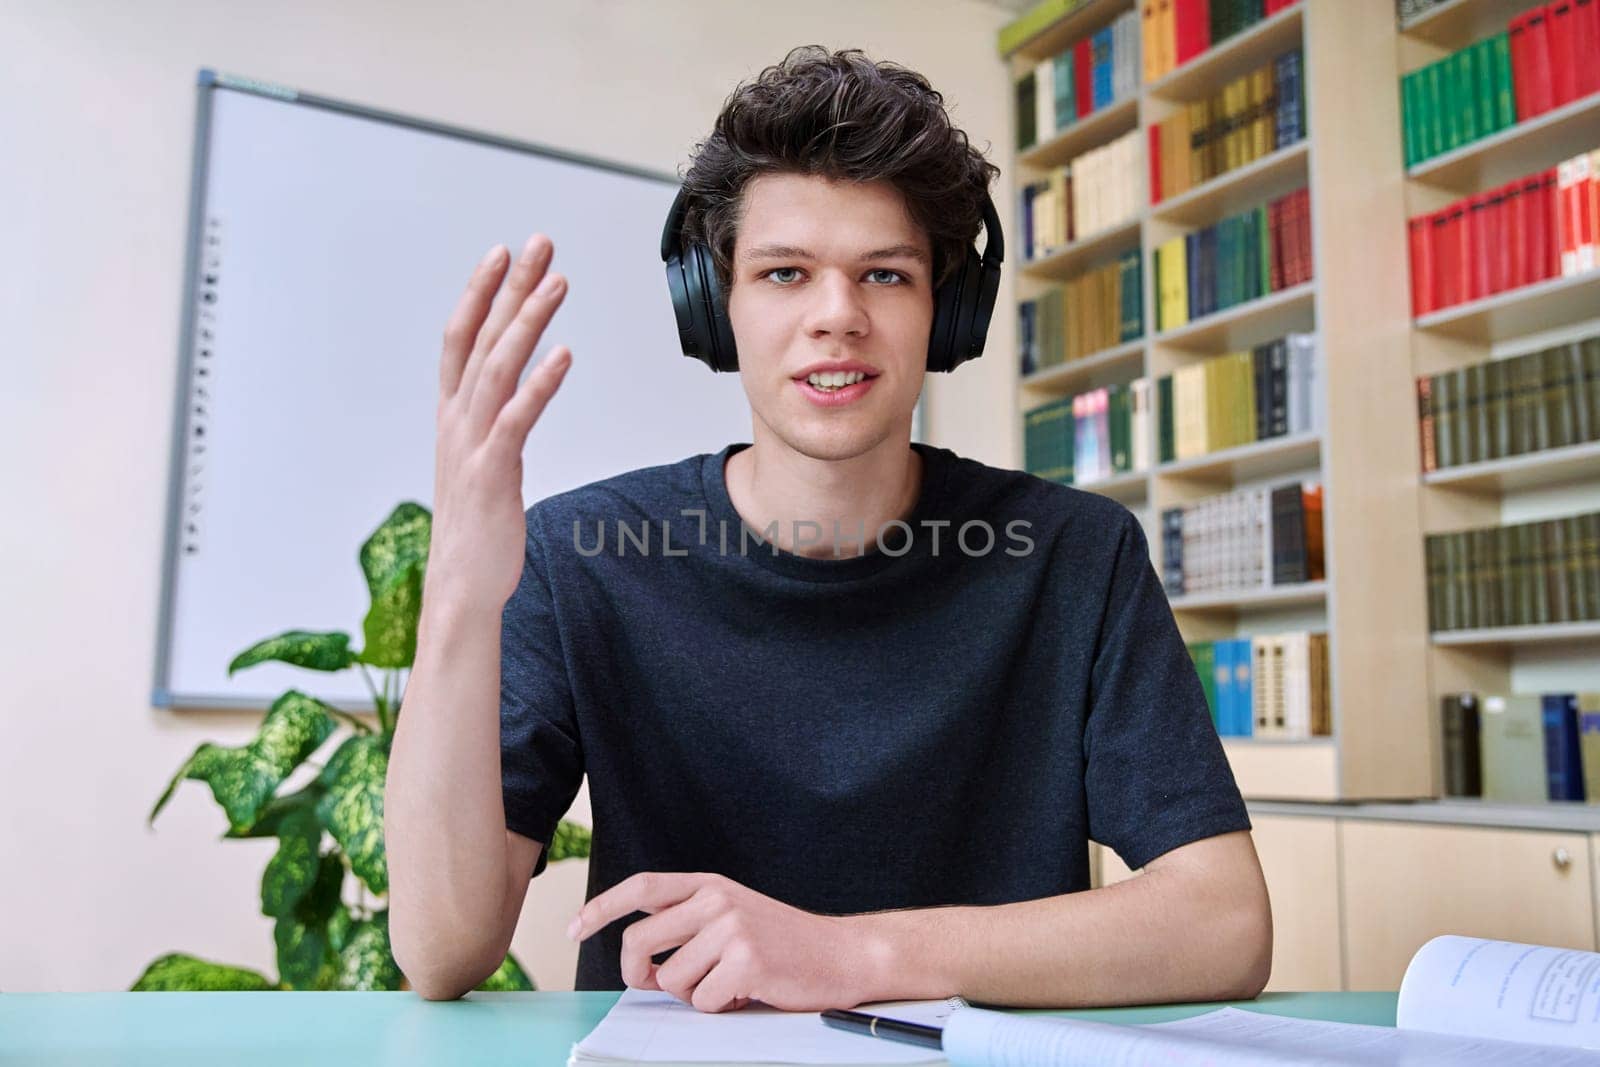 Web cam portrait of college student guy in headphones looking talking to camera in educational building library classroom. Video call chat conference, online lesson exam test, technology education